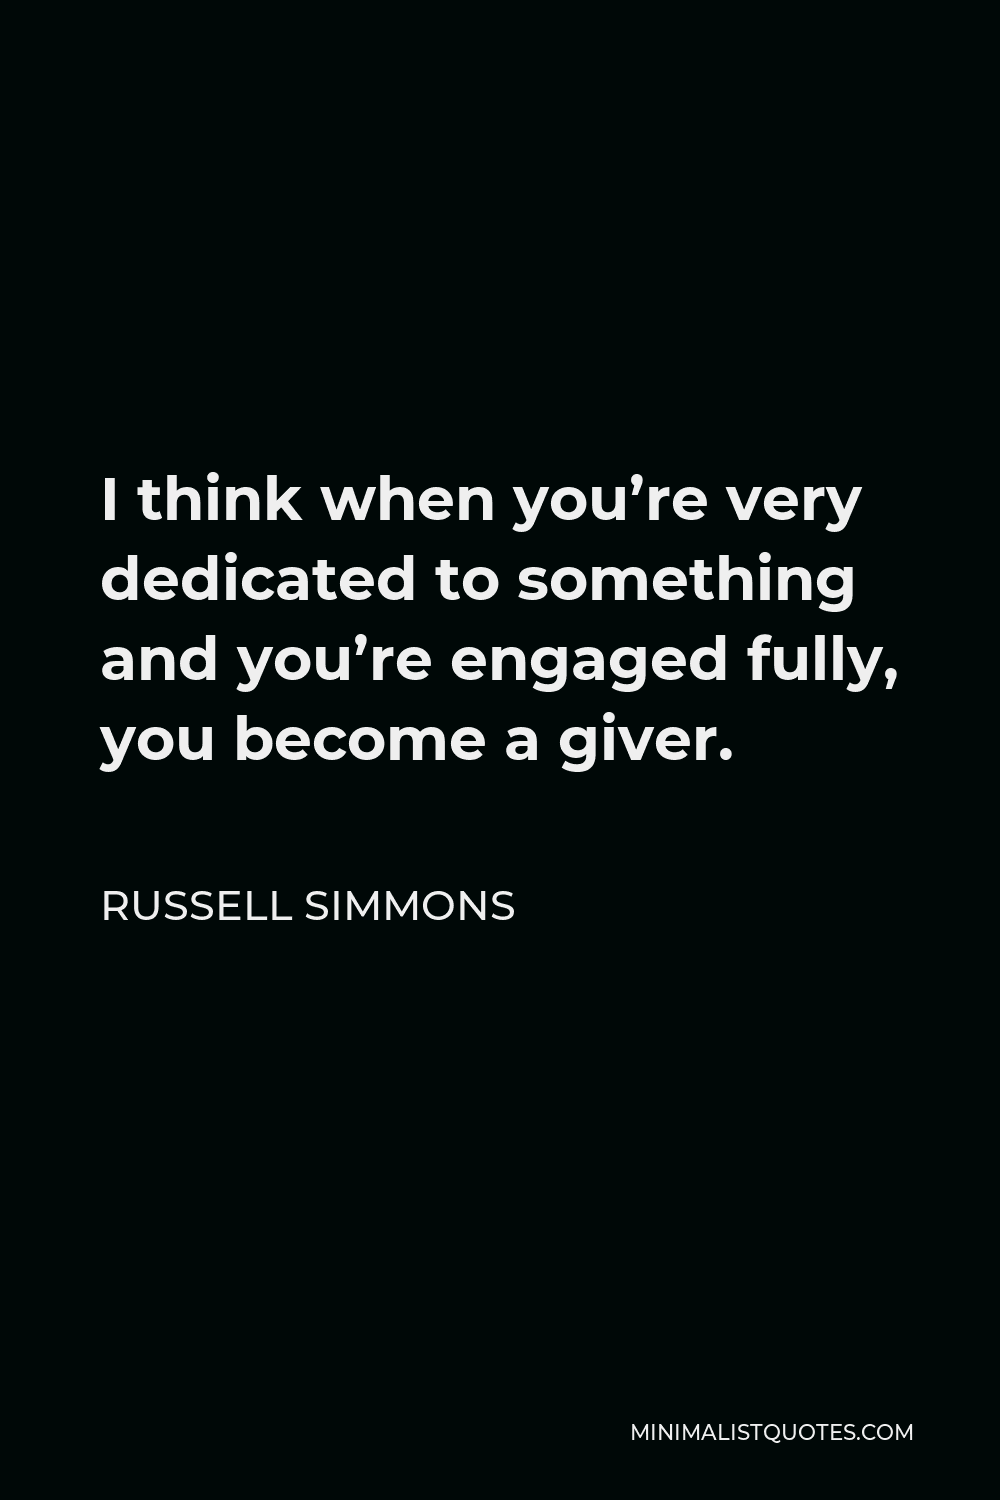 Russell Simmons Quote - I think when you’re very dedicated to something and you’re engaged fully, you become a giver.